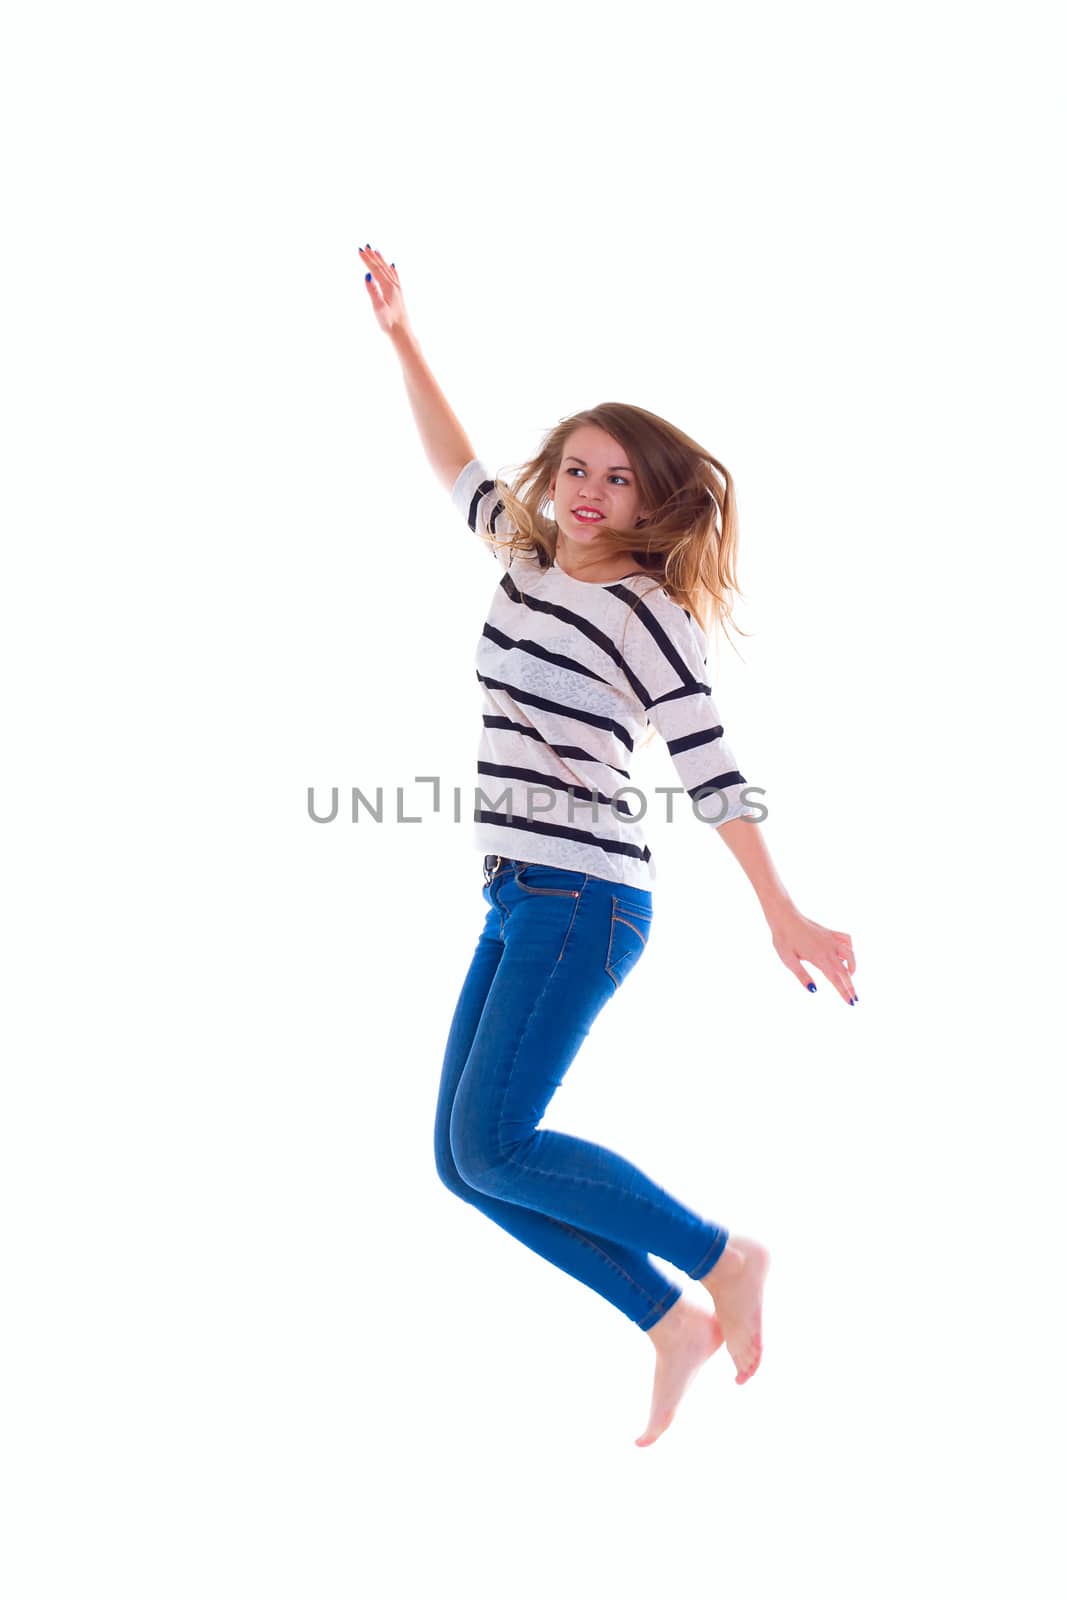 activity and happiness concept - smiling  girl in white blank t-shirt jumping